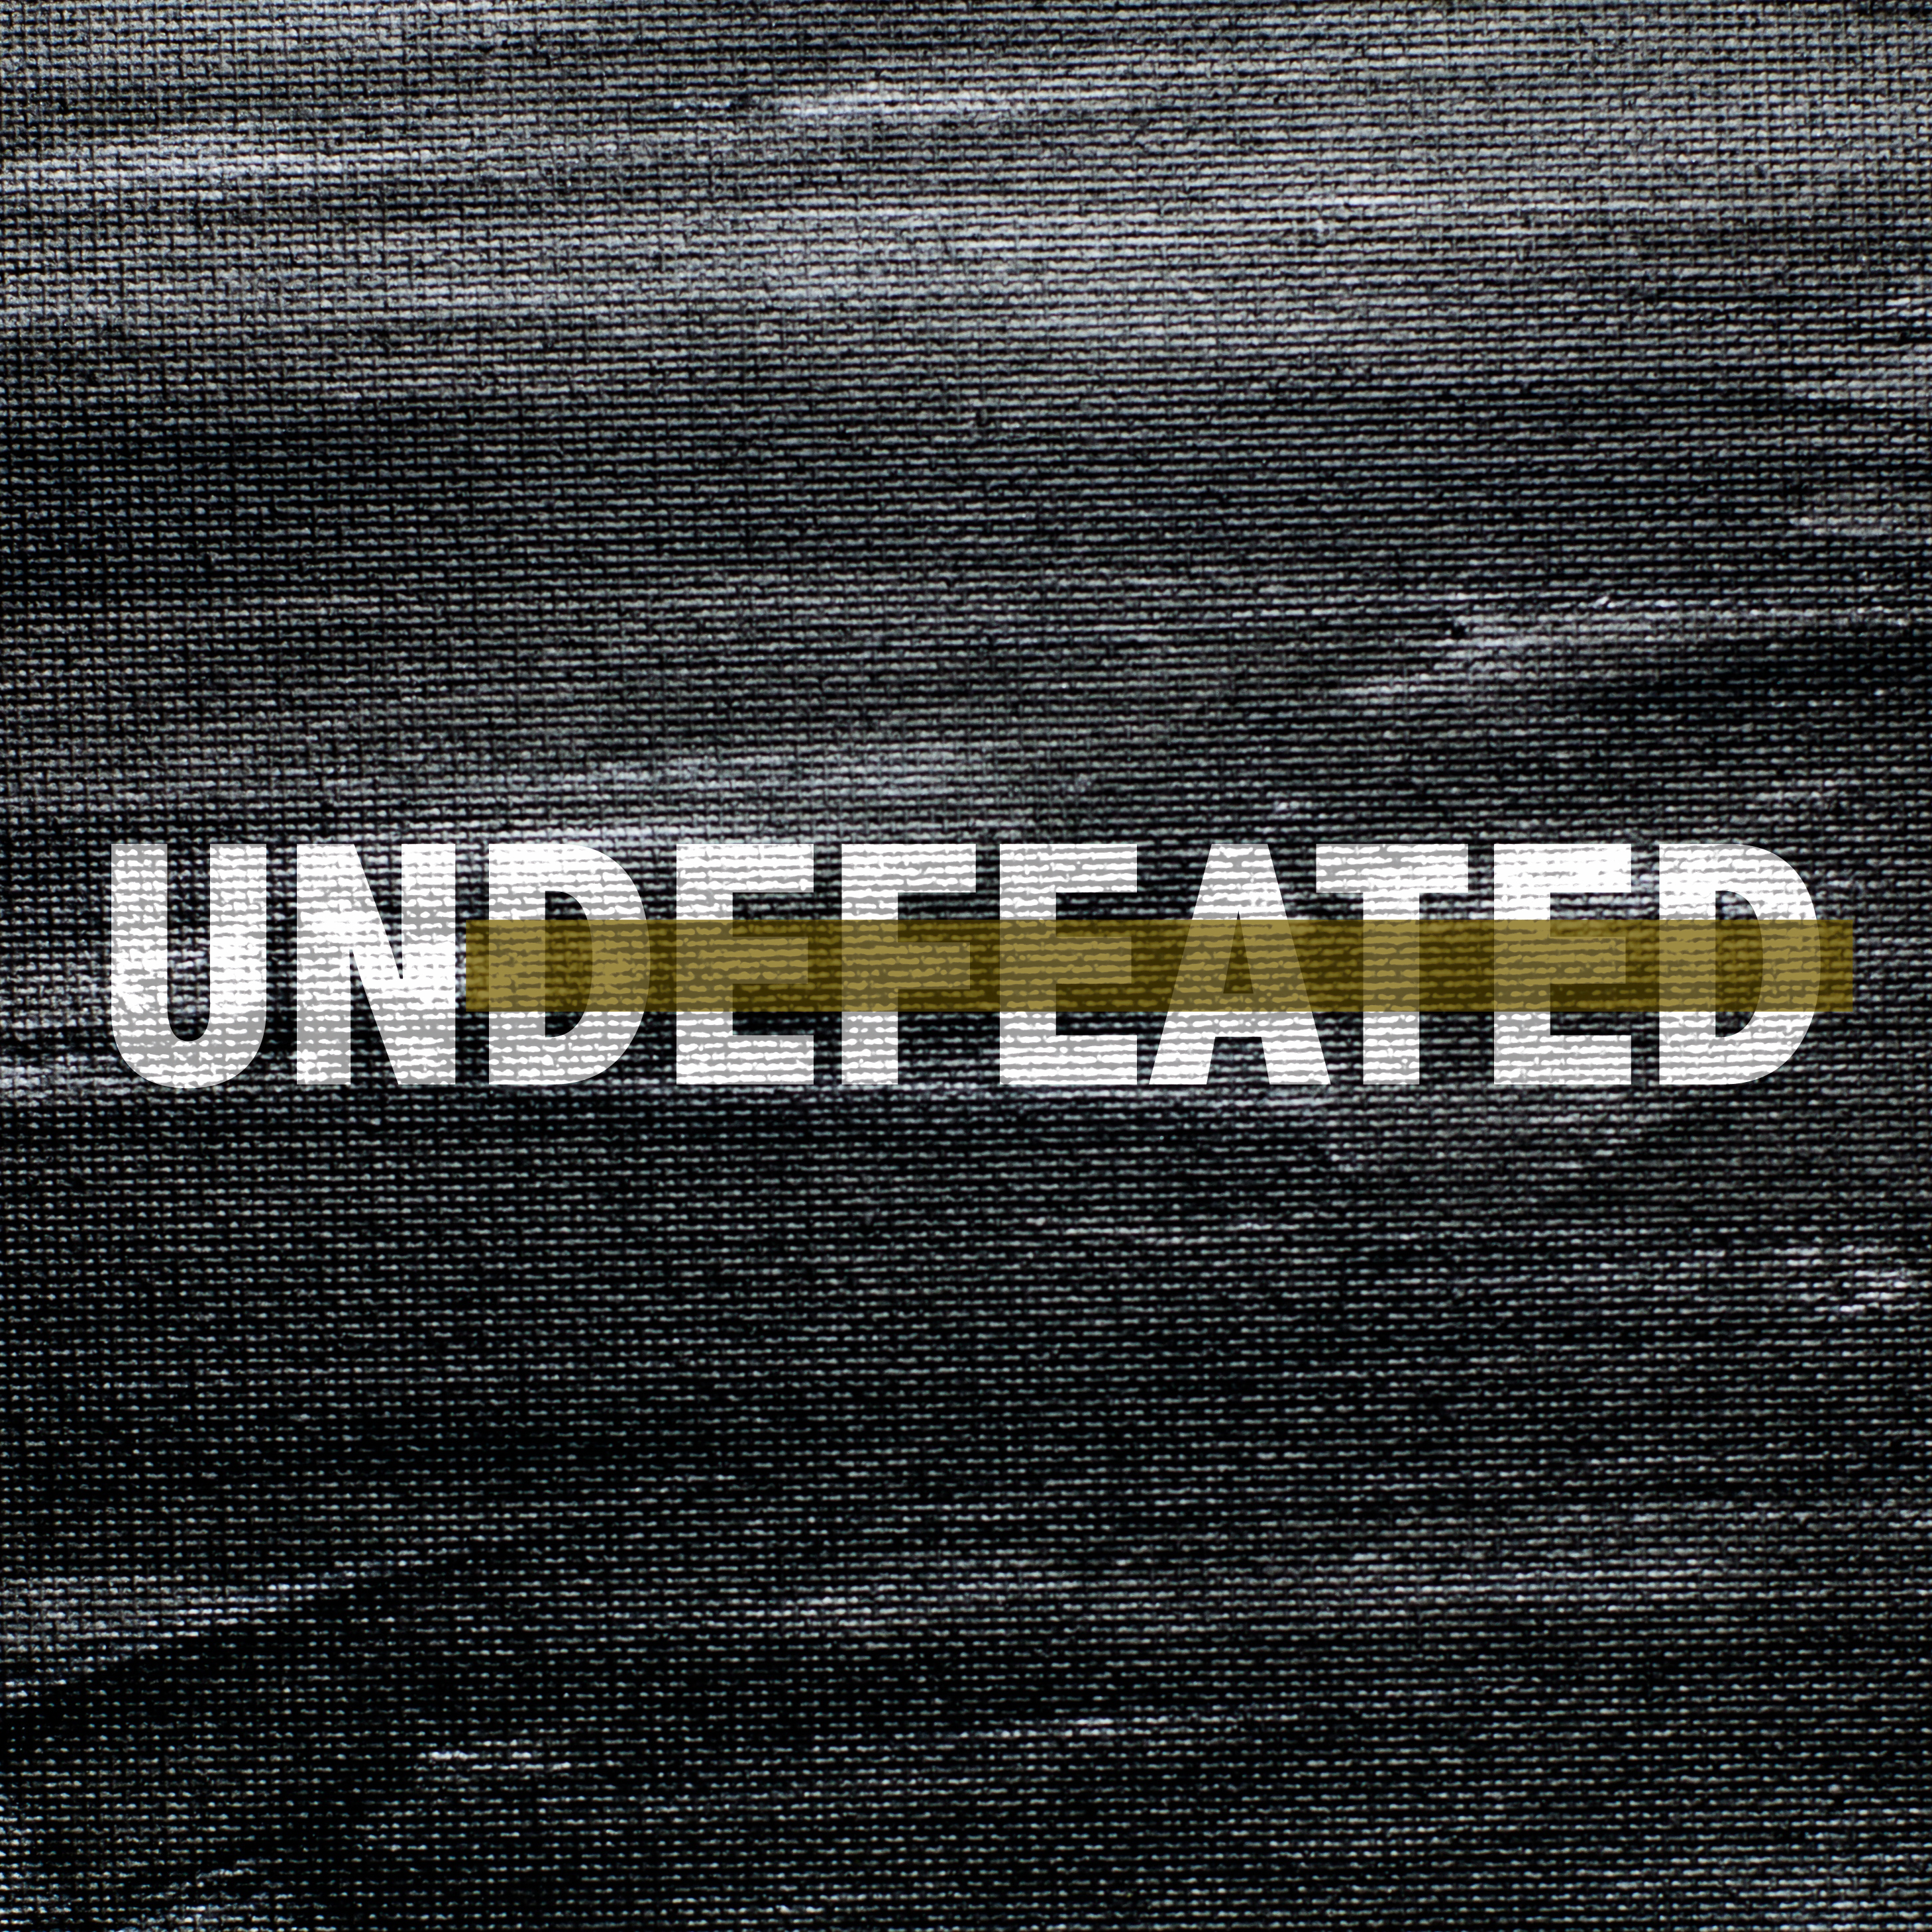 Undefeated – Week One